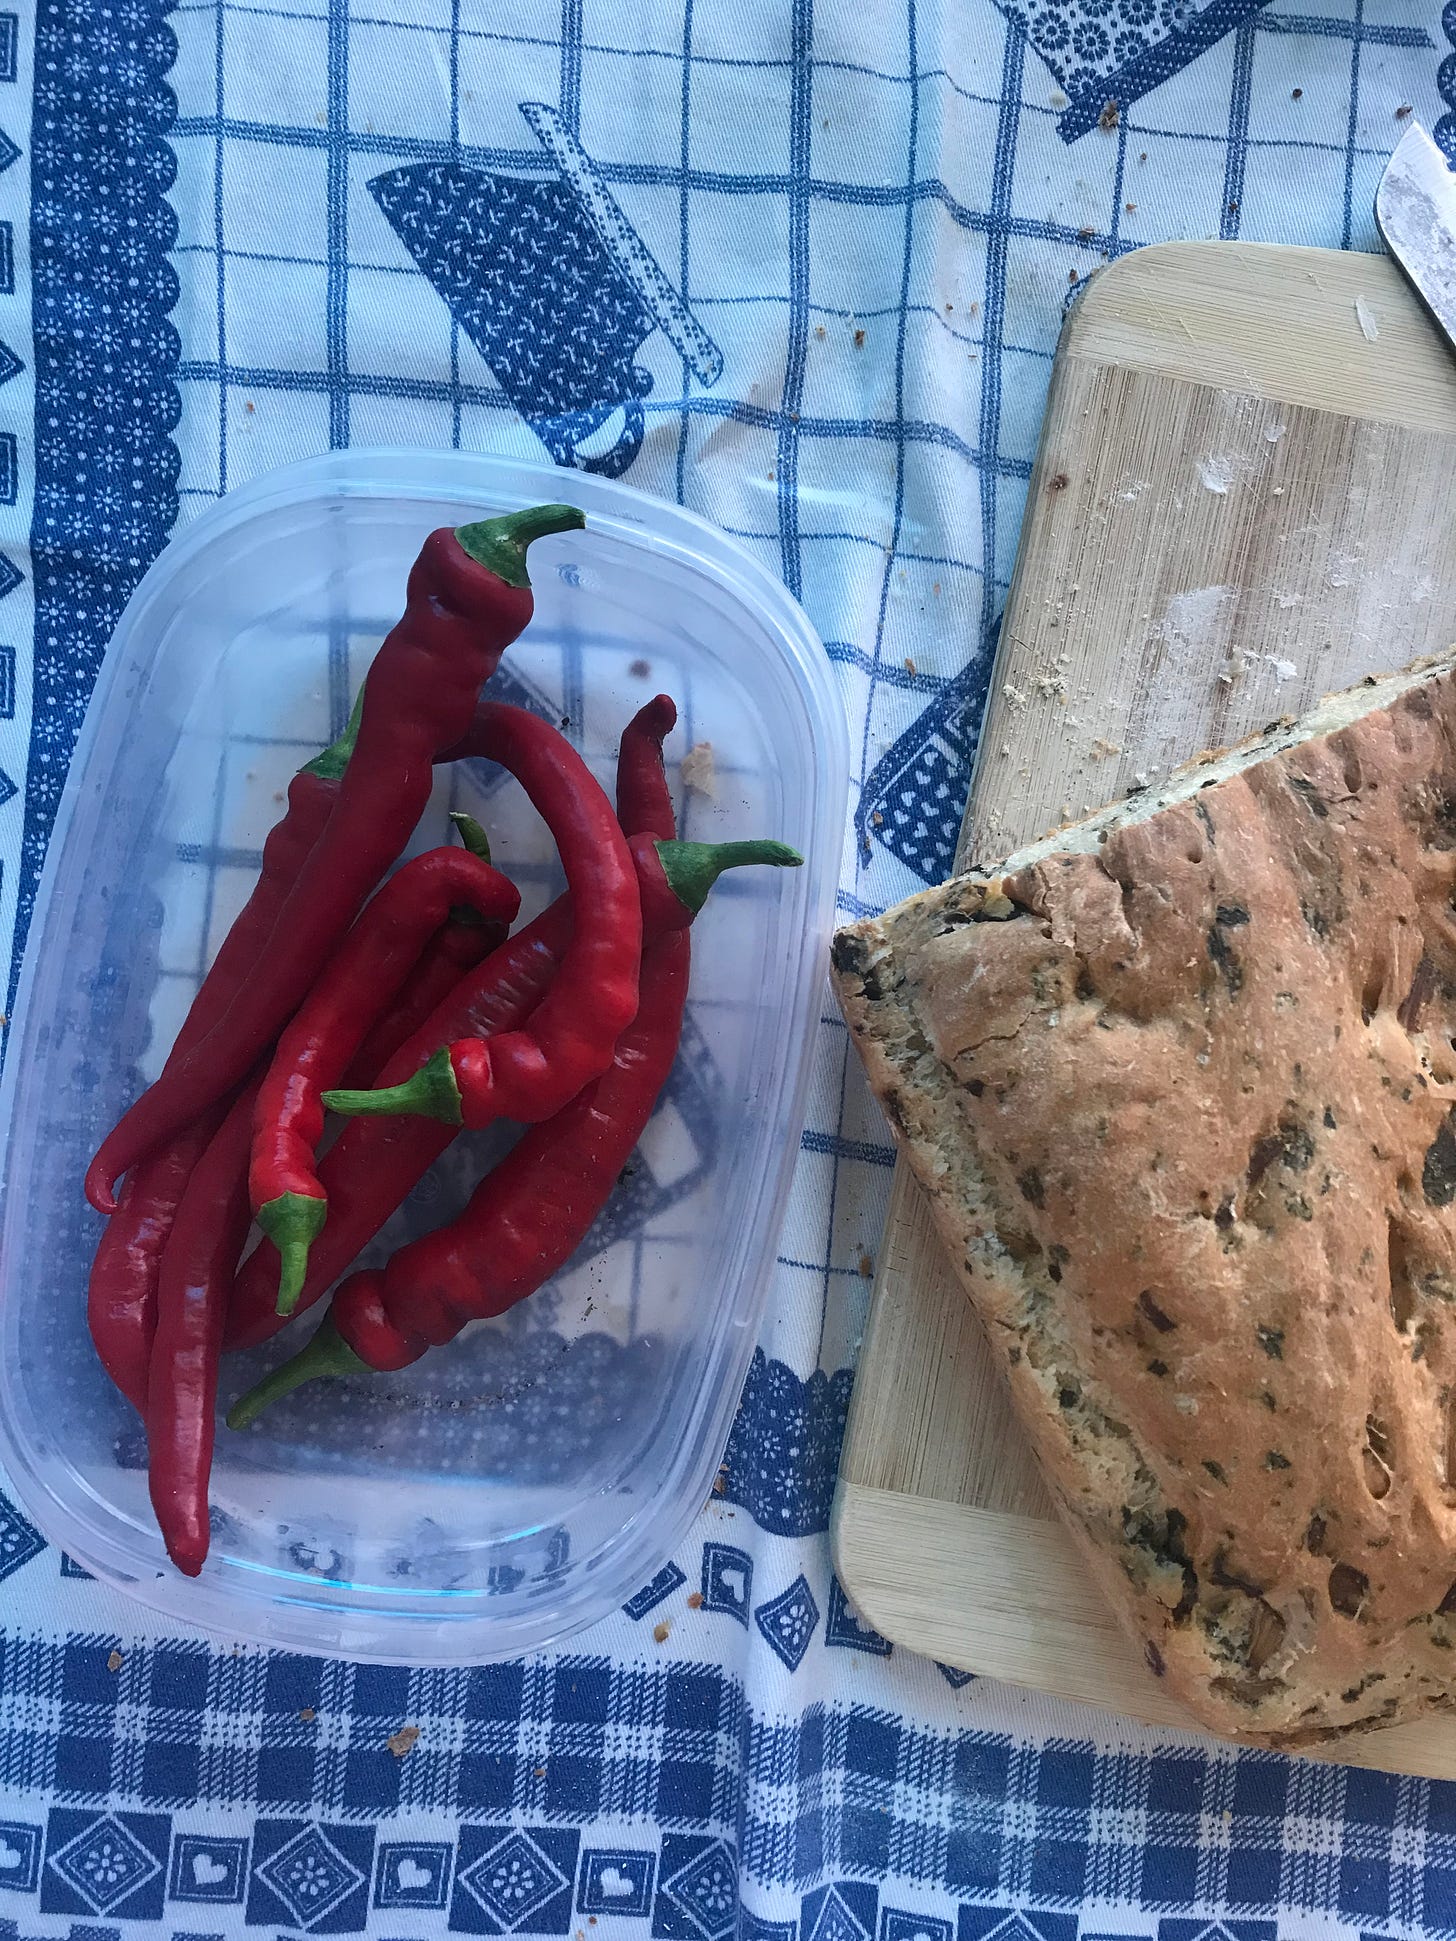 Red peppers in a rectangular tupperware and bread with greens inside on a blue and white tablecloth.